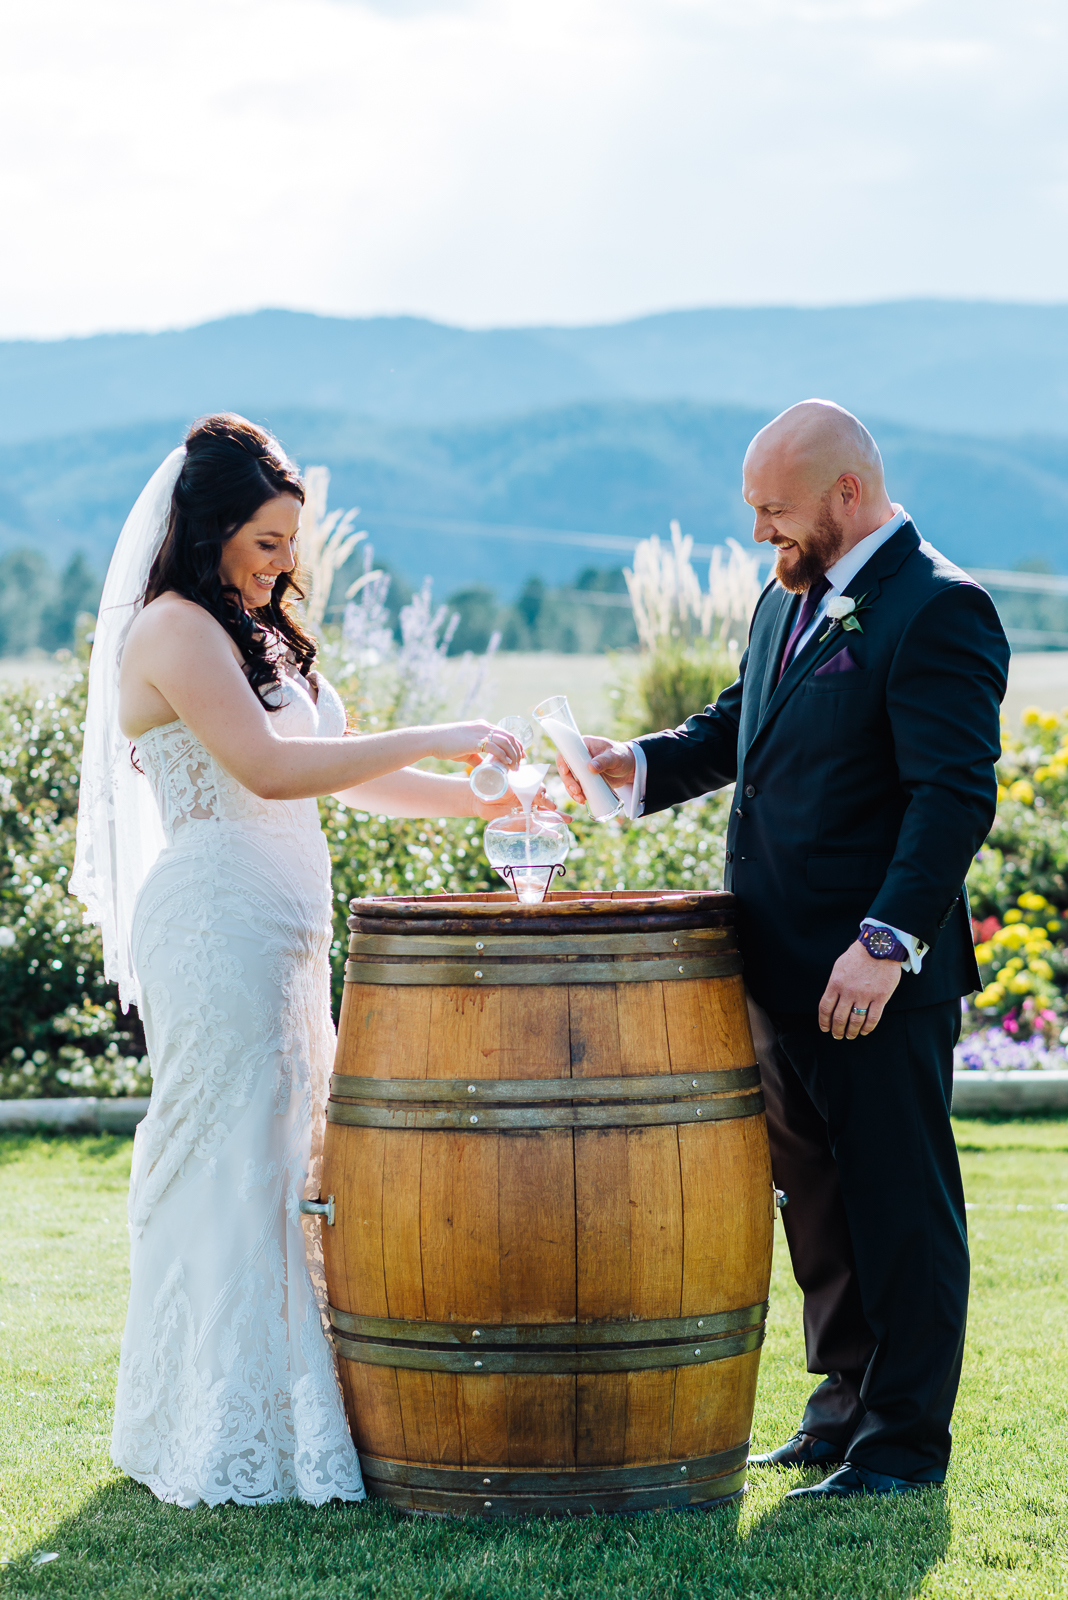 A Sunny Day with Emily & Drew | Crooked Willow Farms Wedding Photos